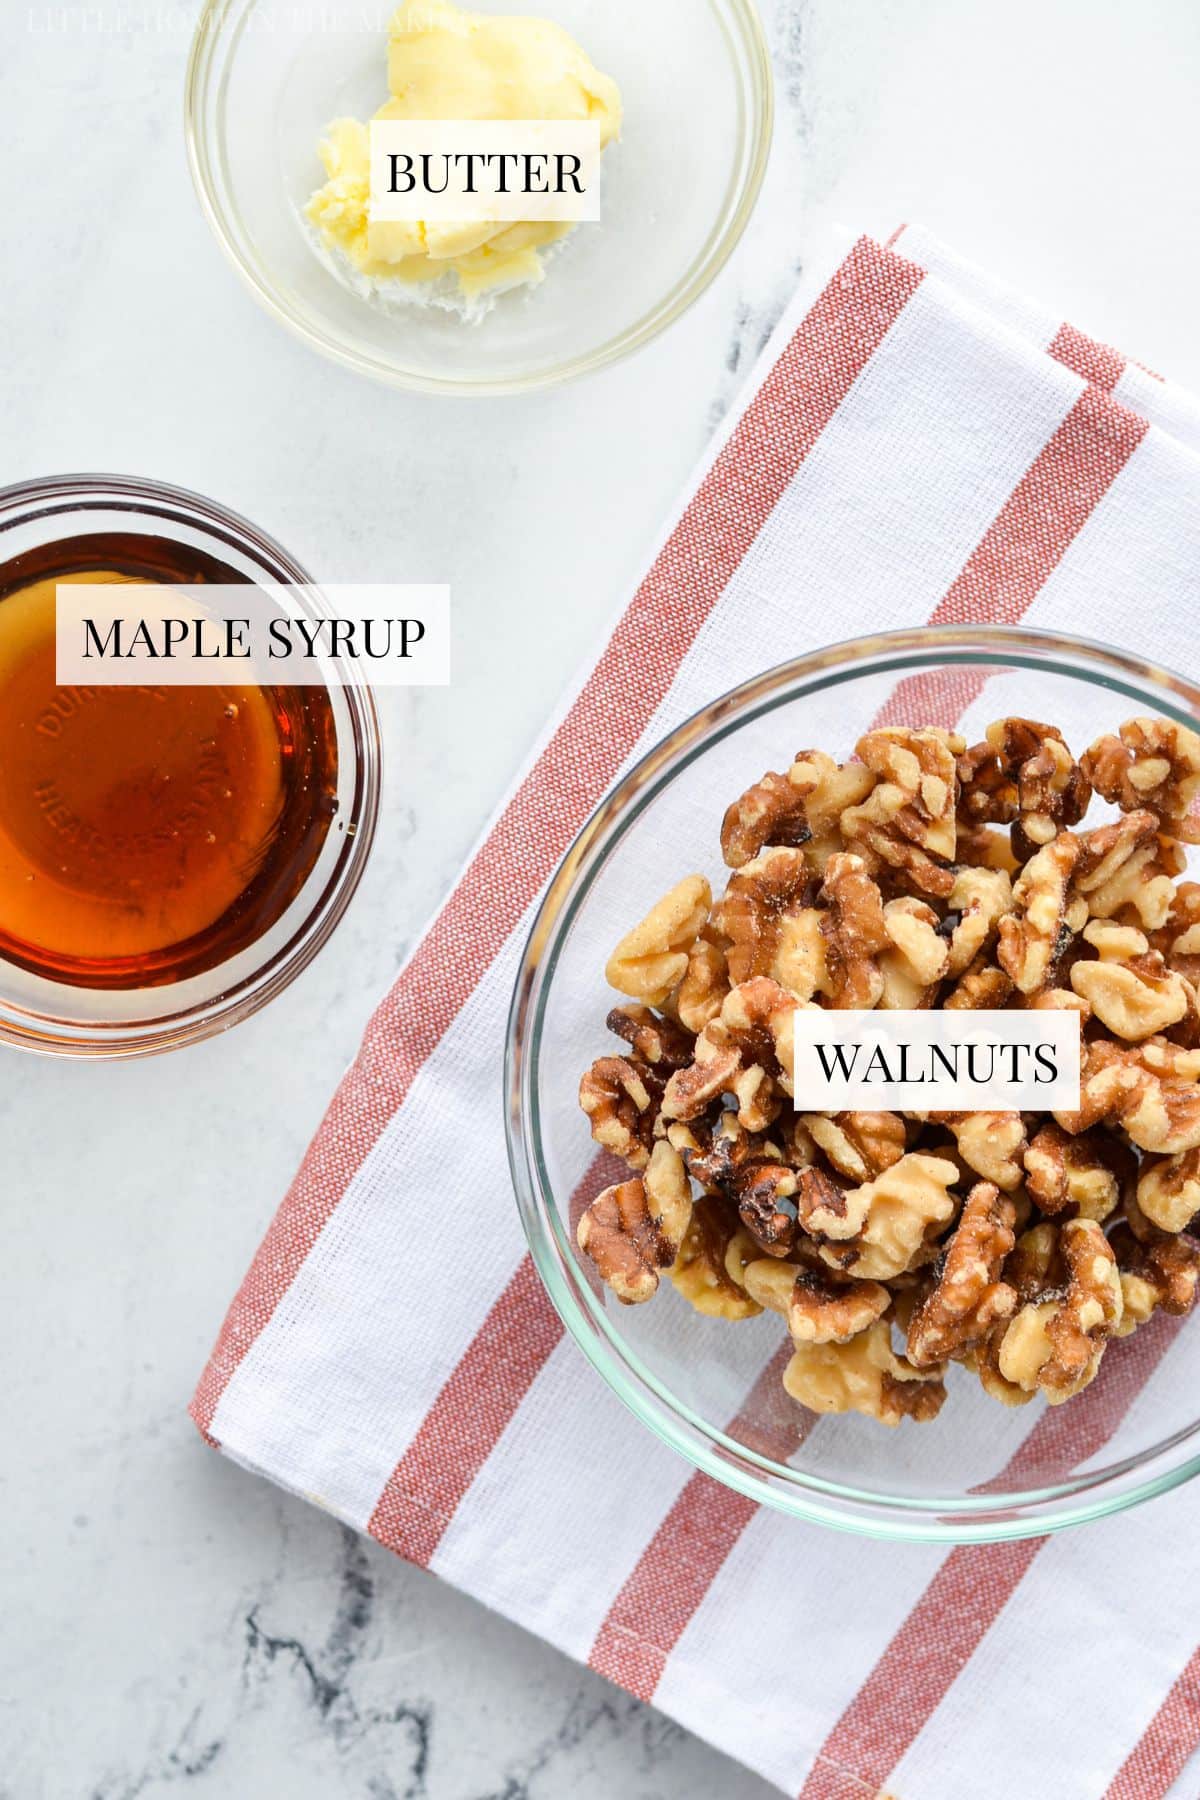 The ingredients needed to make candied walnuts, including walnuts, maple syrup, and butter.